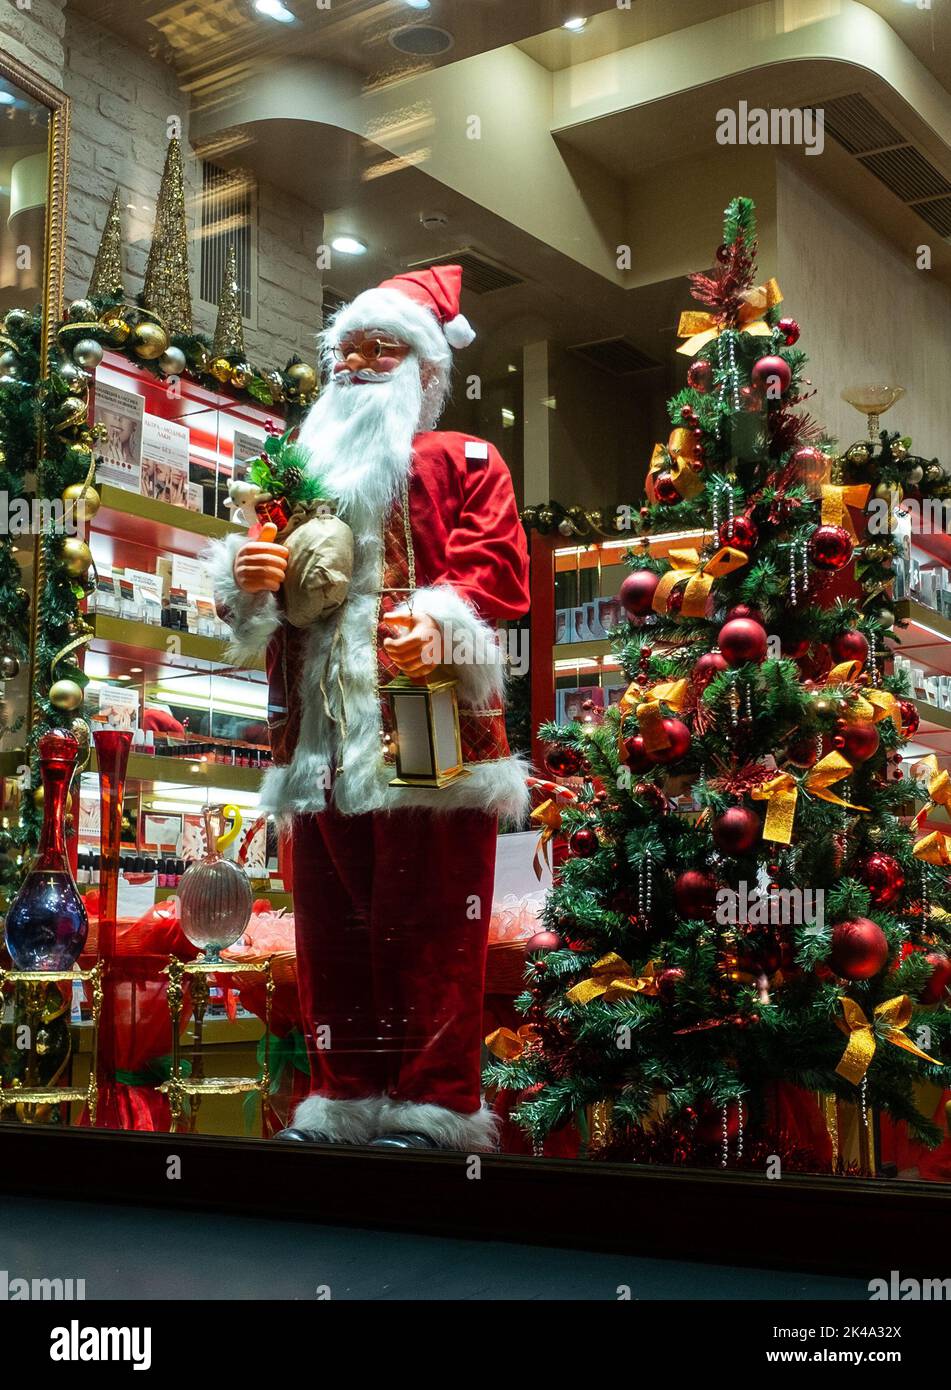 November 22, 2021, Moscow, Russia. Santa Claus and a Christmas tree in the window of a souvenir shop. Stock Photo